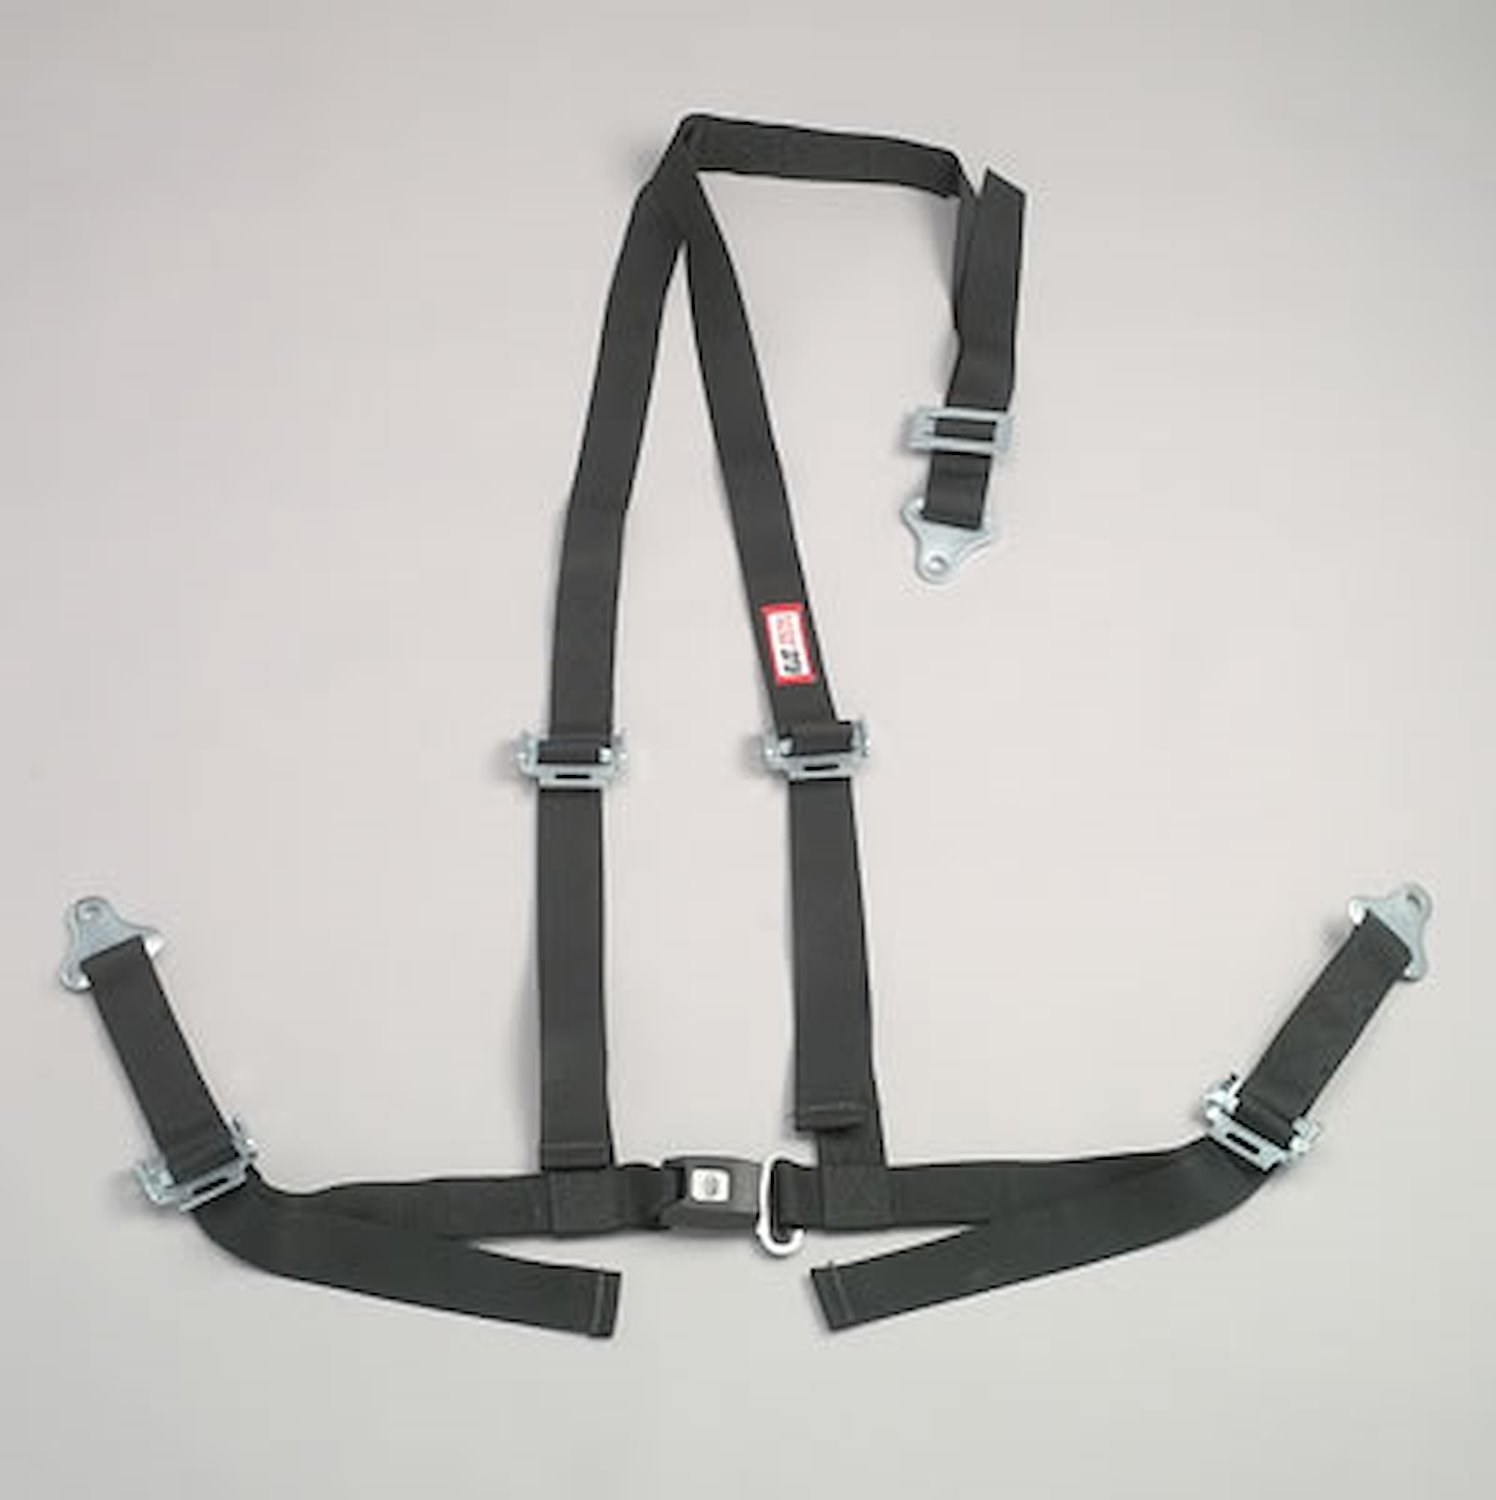 NON-SFI B&T HARNESS 2 PULL DOWN Lap Belt 2 S. H. Y FLOOR Mount ALL WRAP ENDS w/STERNUM STRAP RED